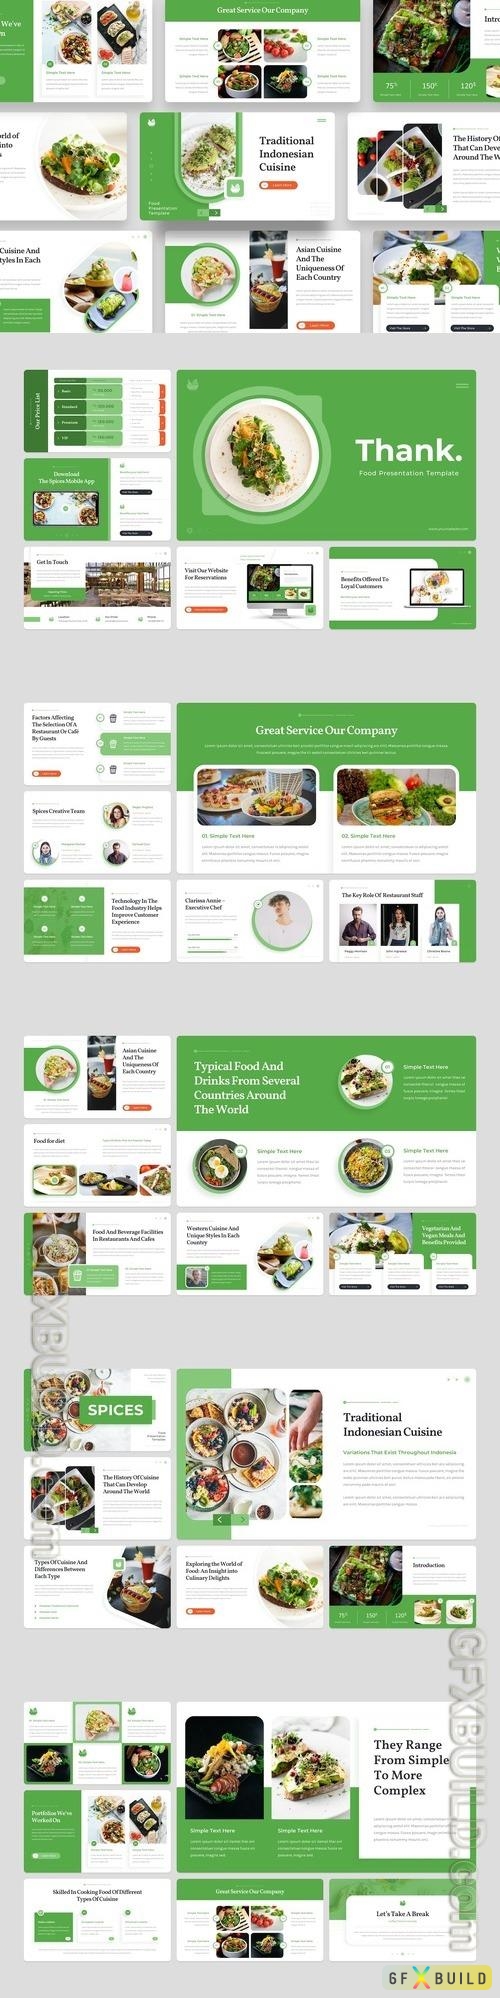 Spices - Food PowerPoint Template